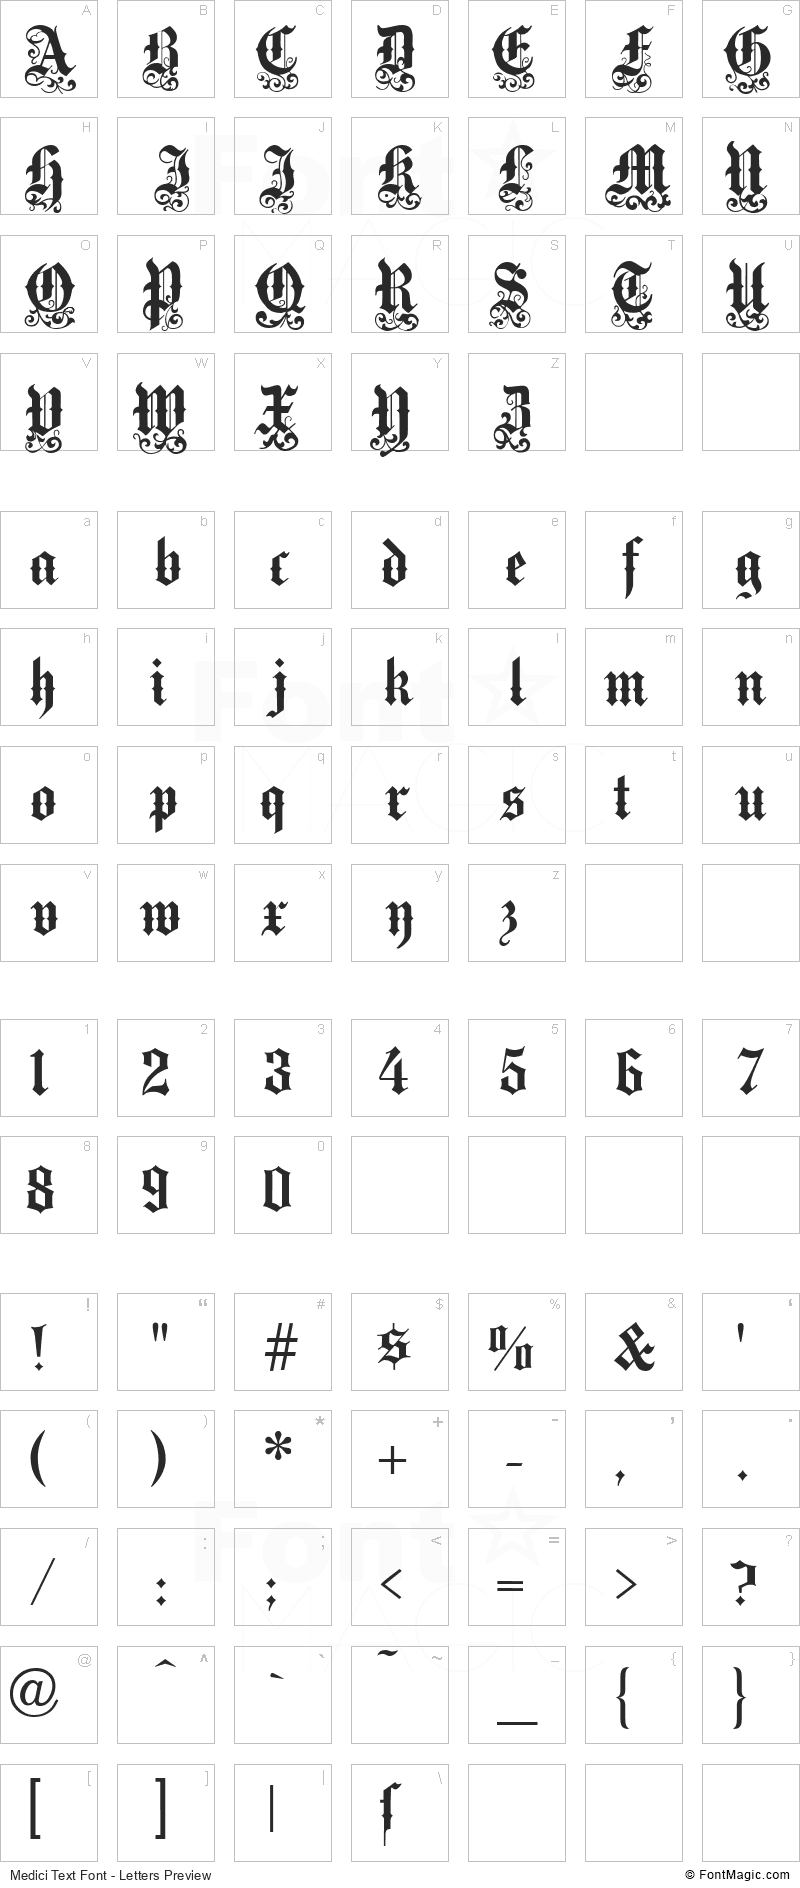 Medici Text Font - All Latters Preview Chart